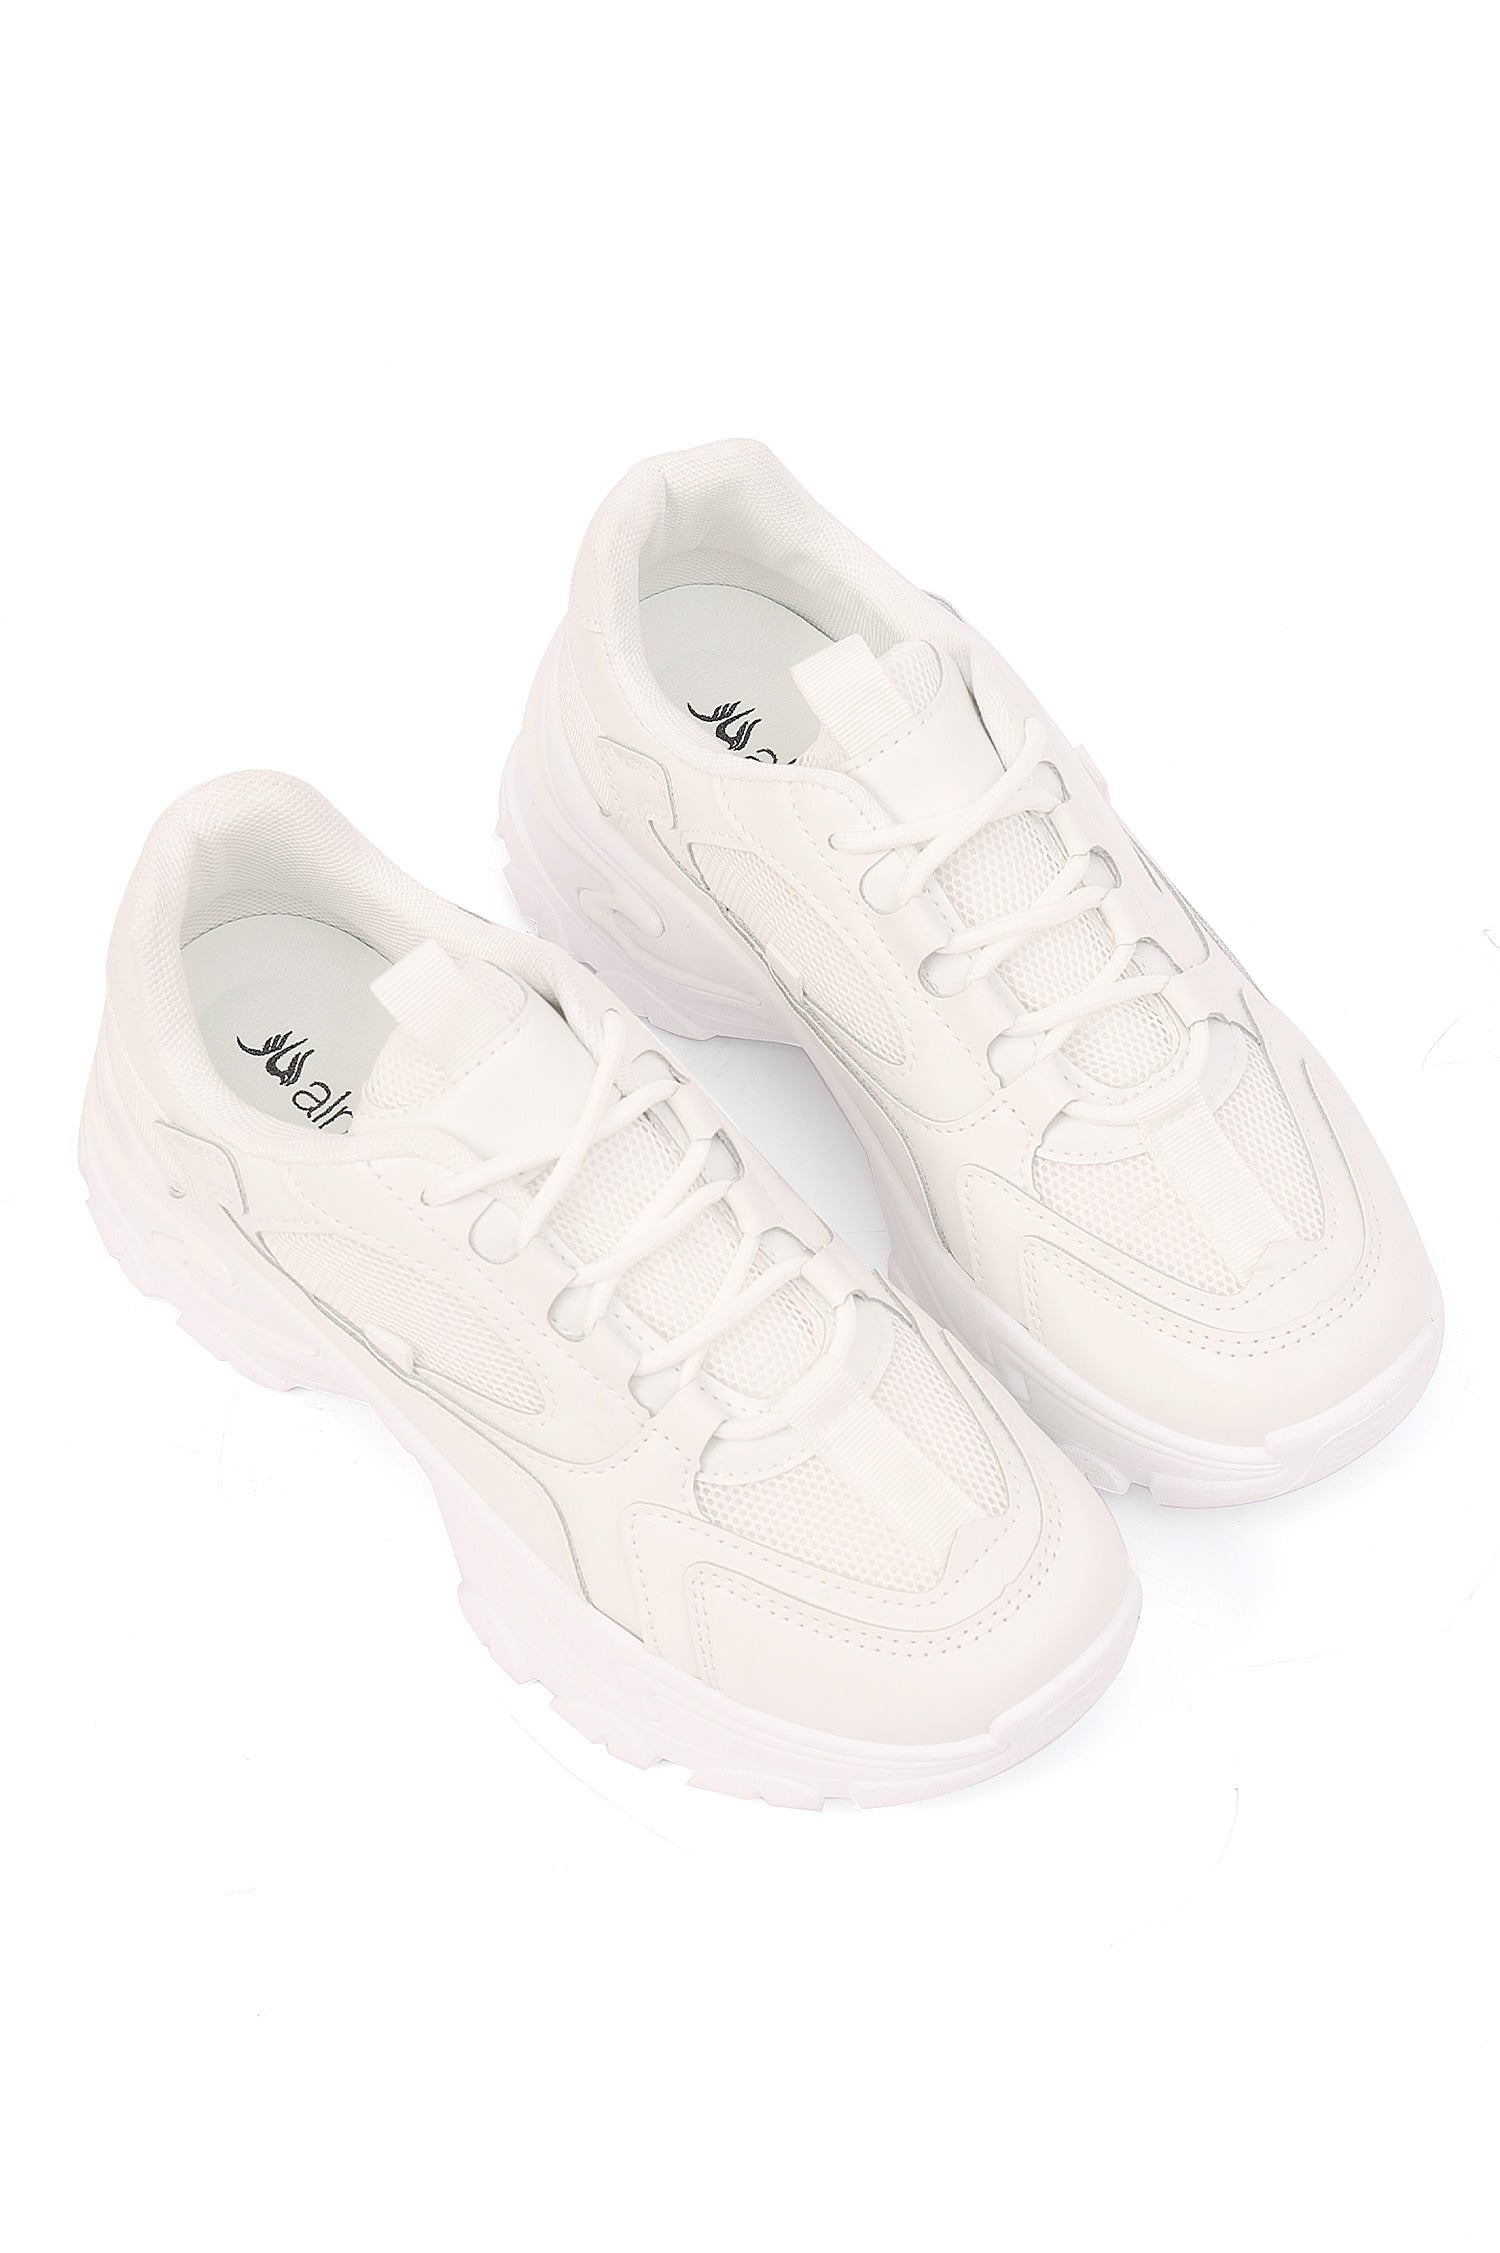 DAD SNEAKERS-WHITE